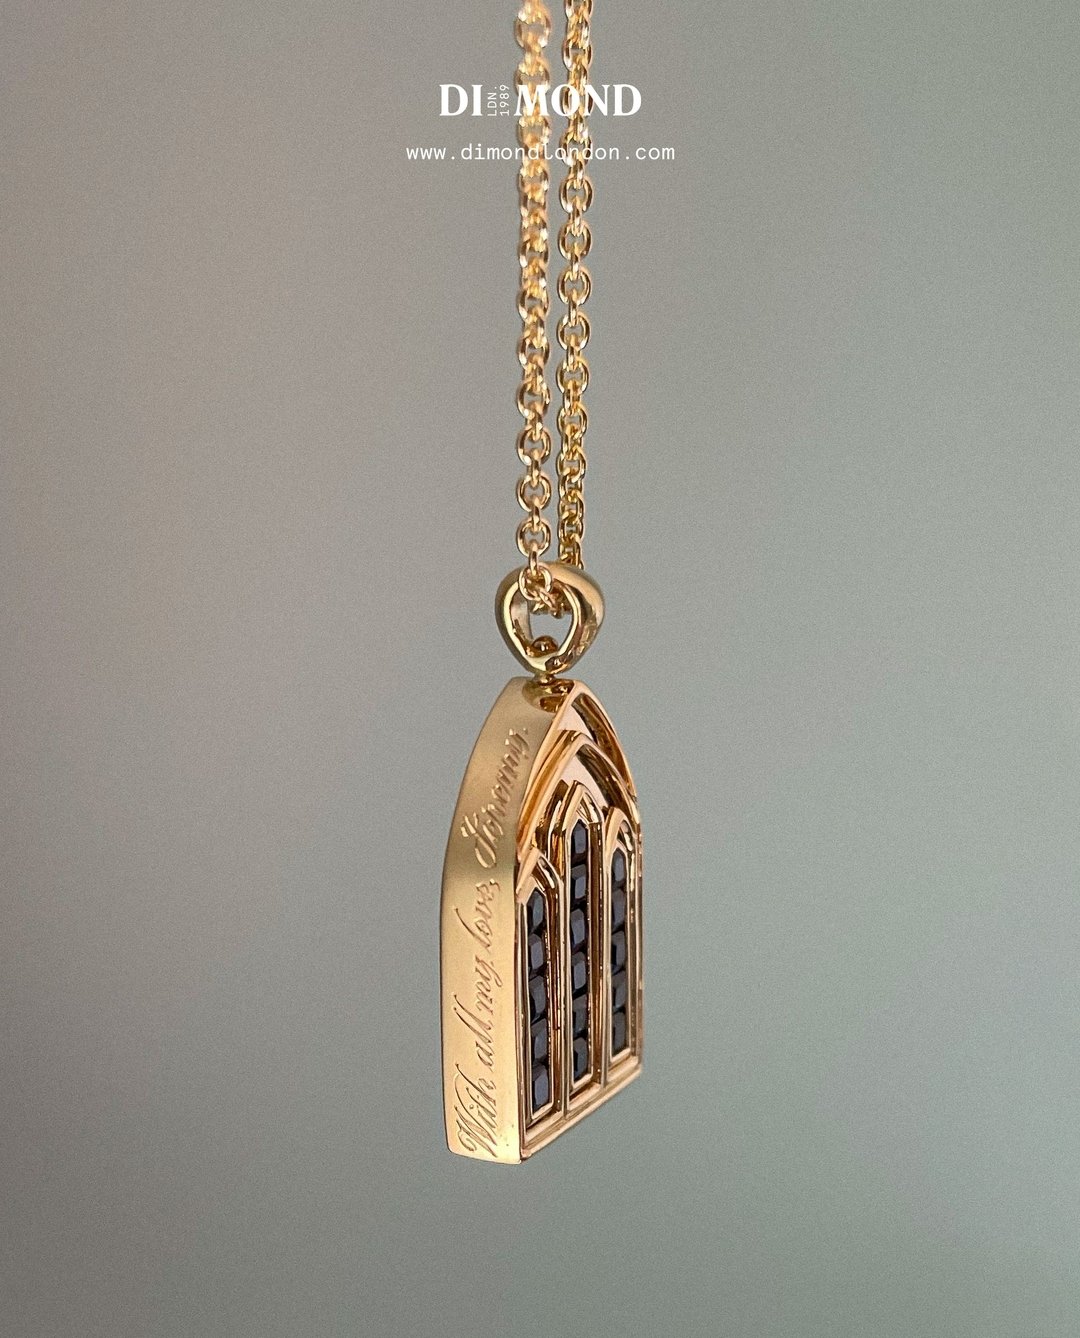 We love the opportunity to craft one-of-a-kind commissions, and this particular project is like no other we've worked on. This pendant was designed as a 60th birthday gift, made from recycled 18ct gold and decorated with diamonds on one side and sapp